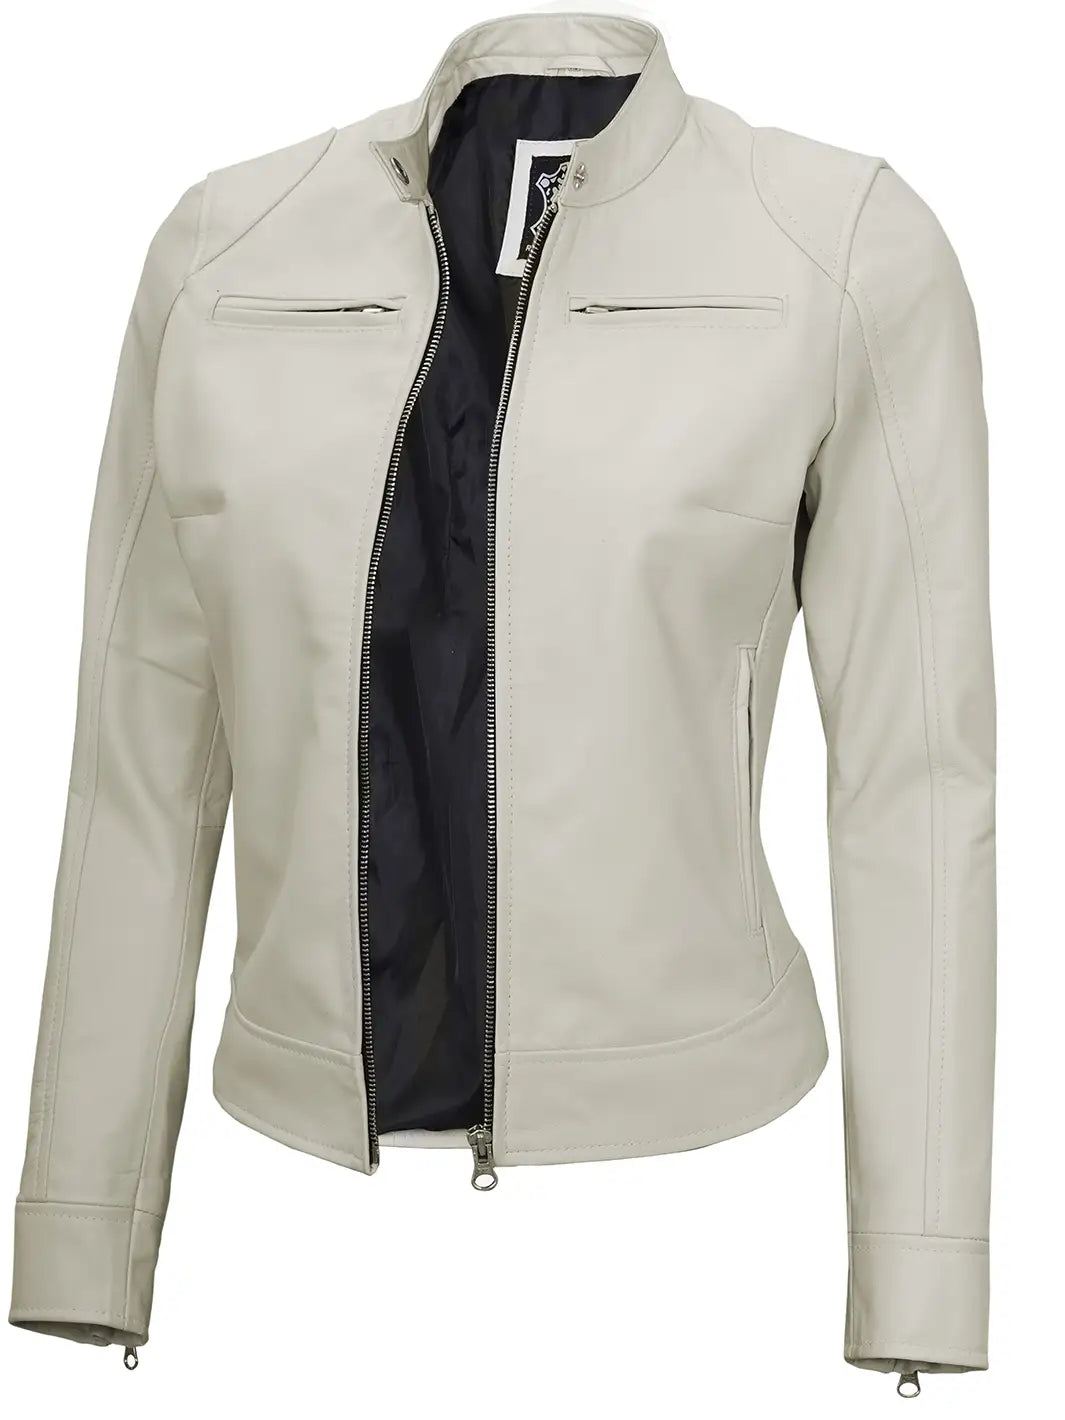 Cafe racer leather jacket for womens